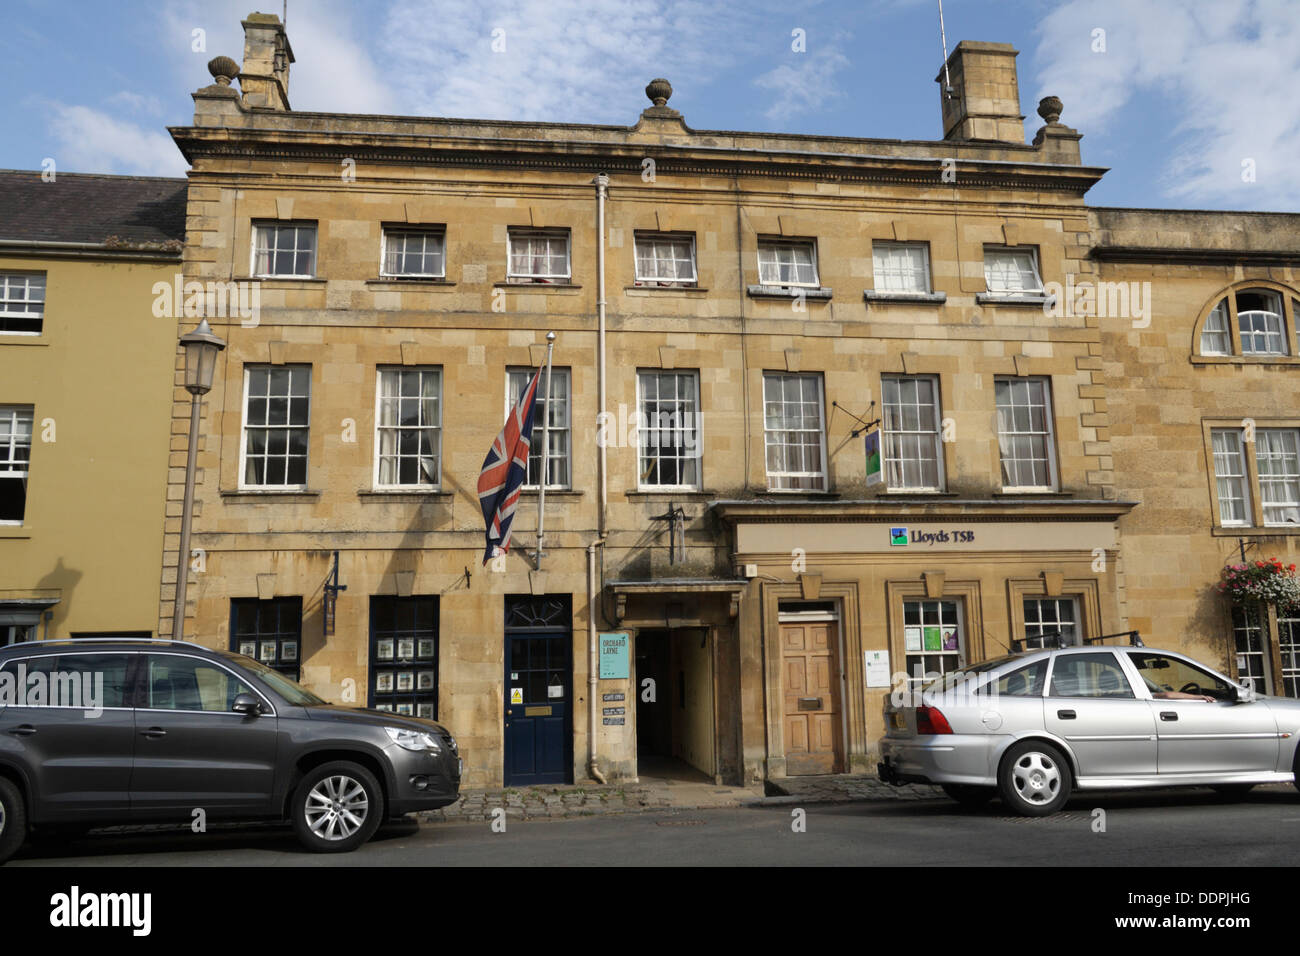 Lloyds TSB Bank, British Legion building Chipping Campden High Street England, town in the English Cotswolds, Rural bank branch Grade II* listed Stock Photo